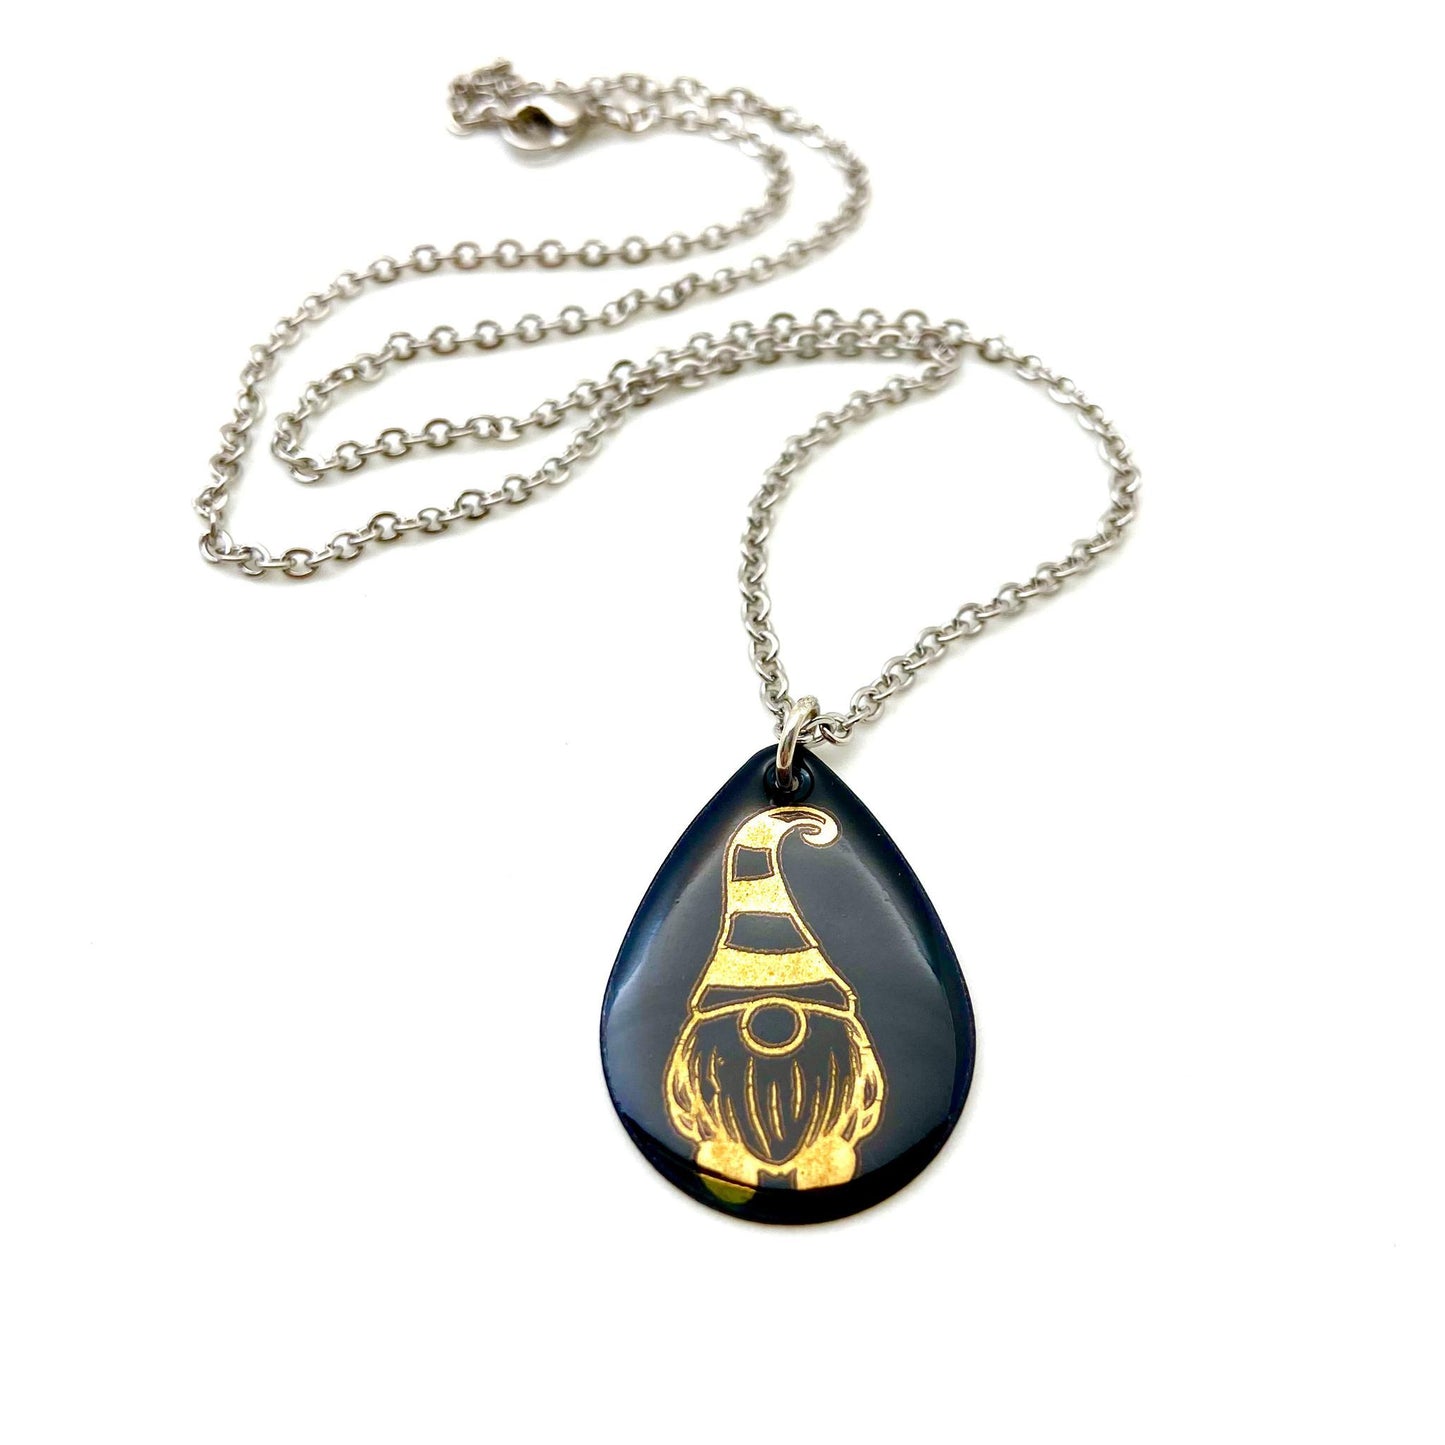 Necklace - Gnome with Striped Hat - Enamel and 22kt Gold on Copper